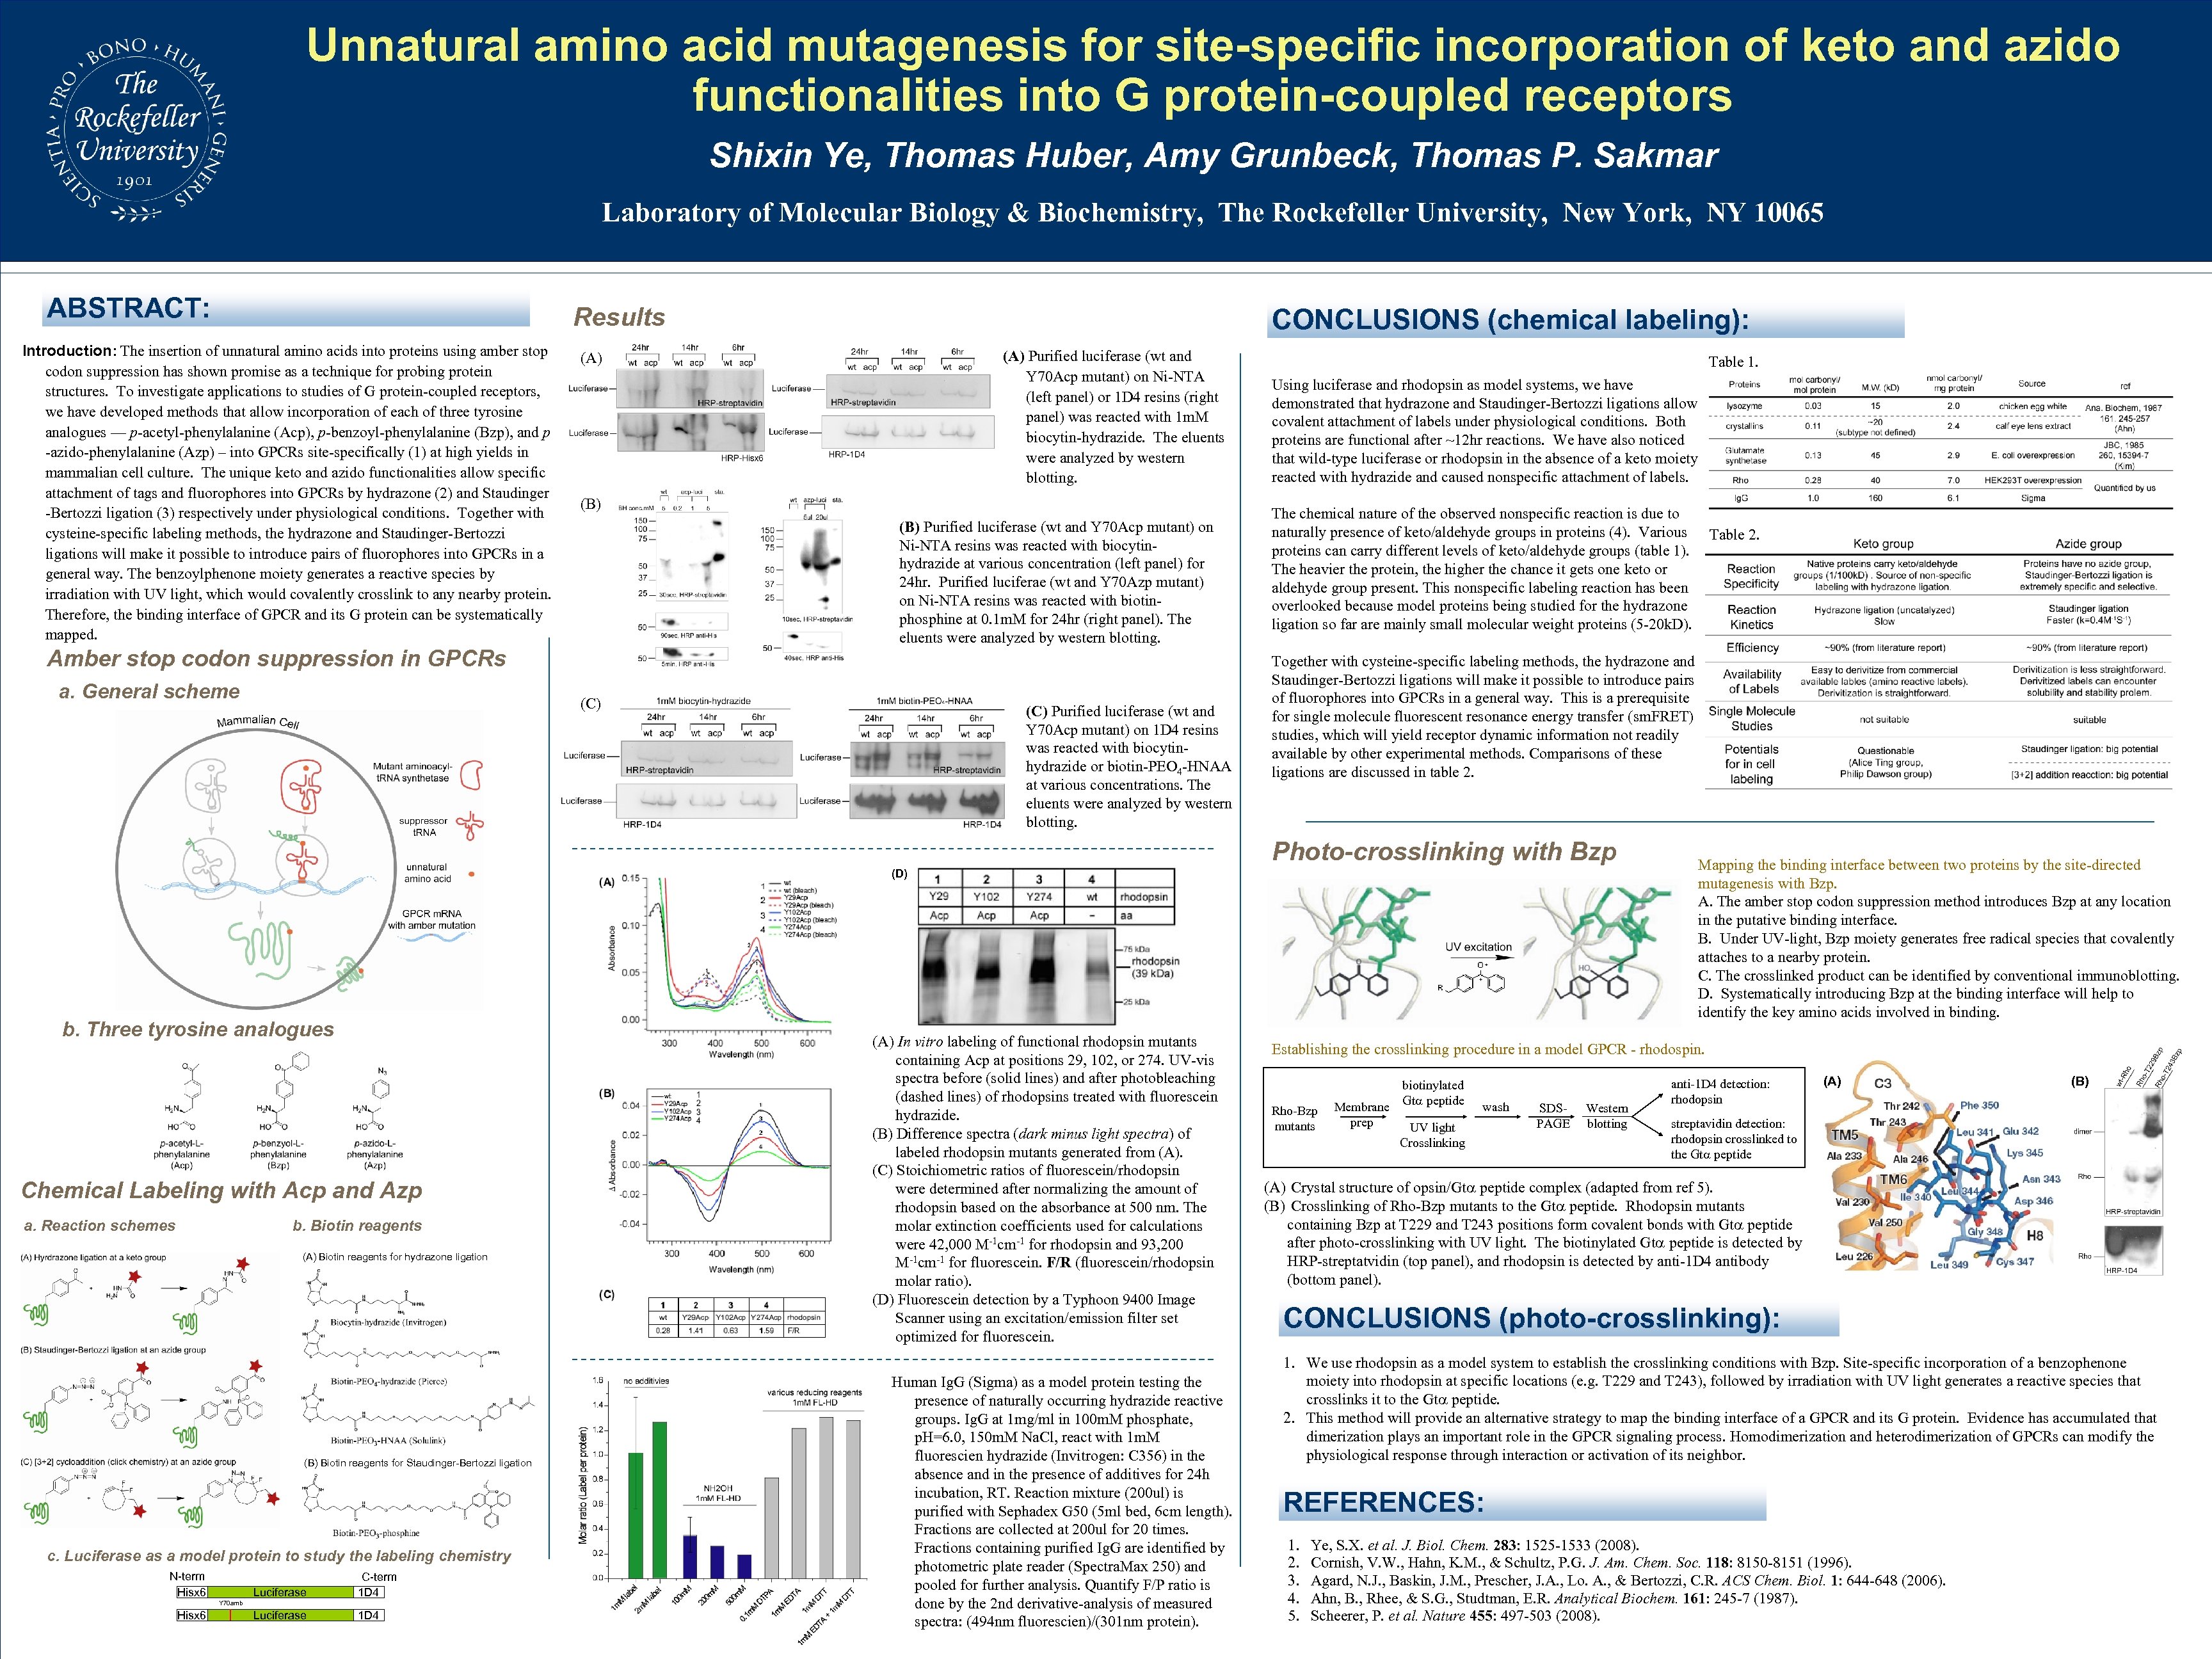 Unnatural amino acid mutagenesis for site-specific incorporation of keto and azido functionalities into G